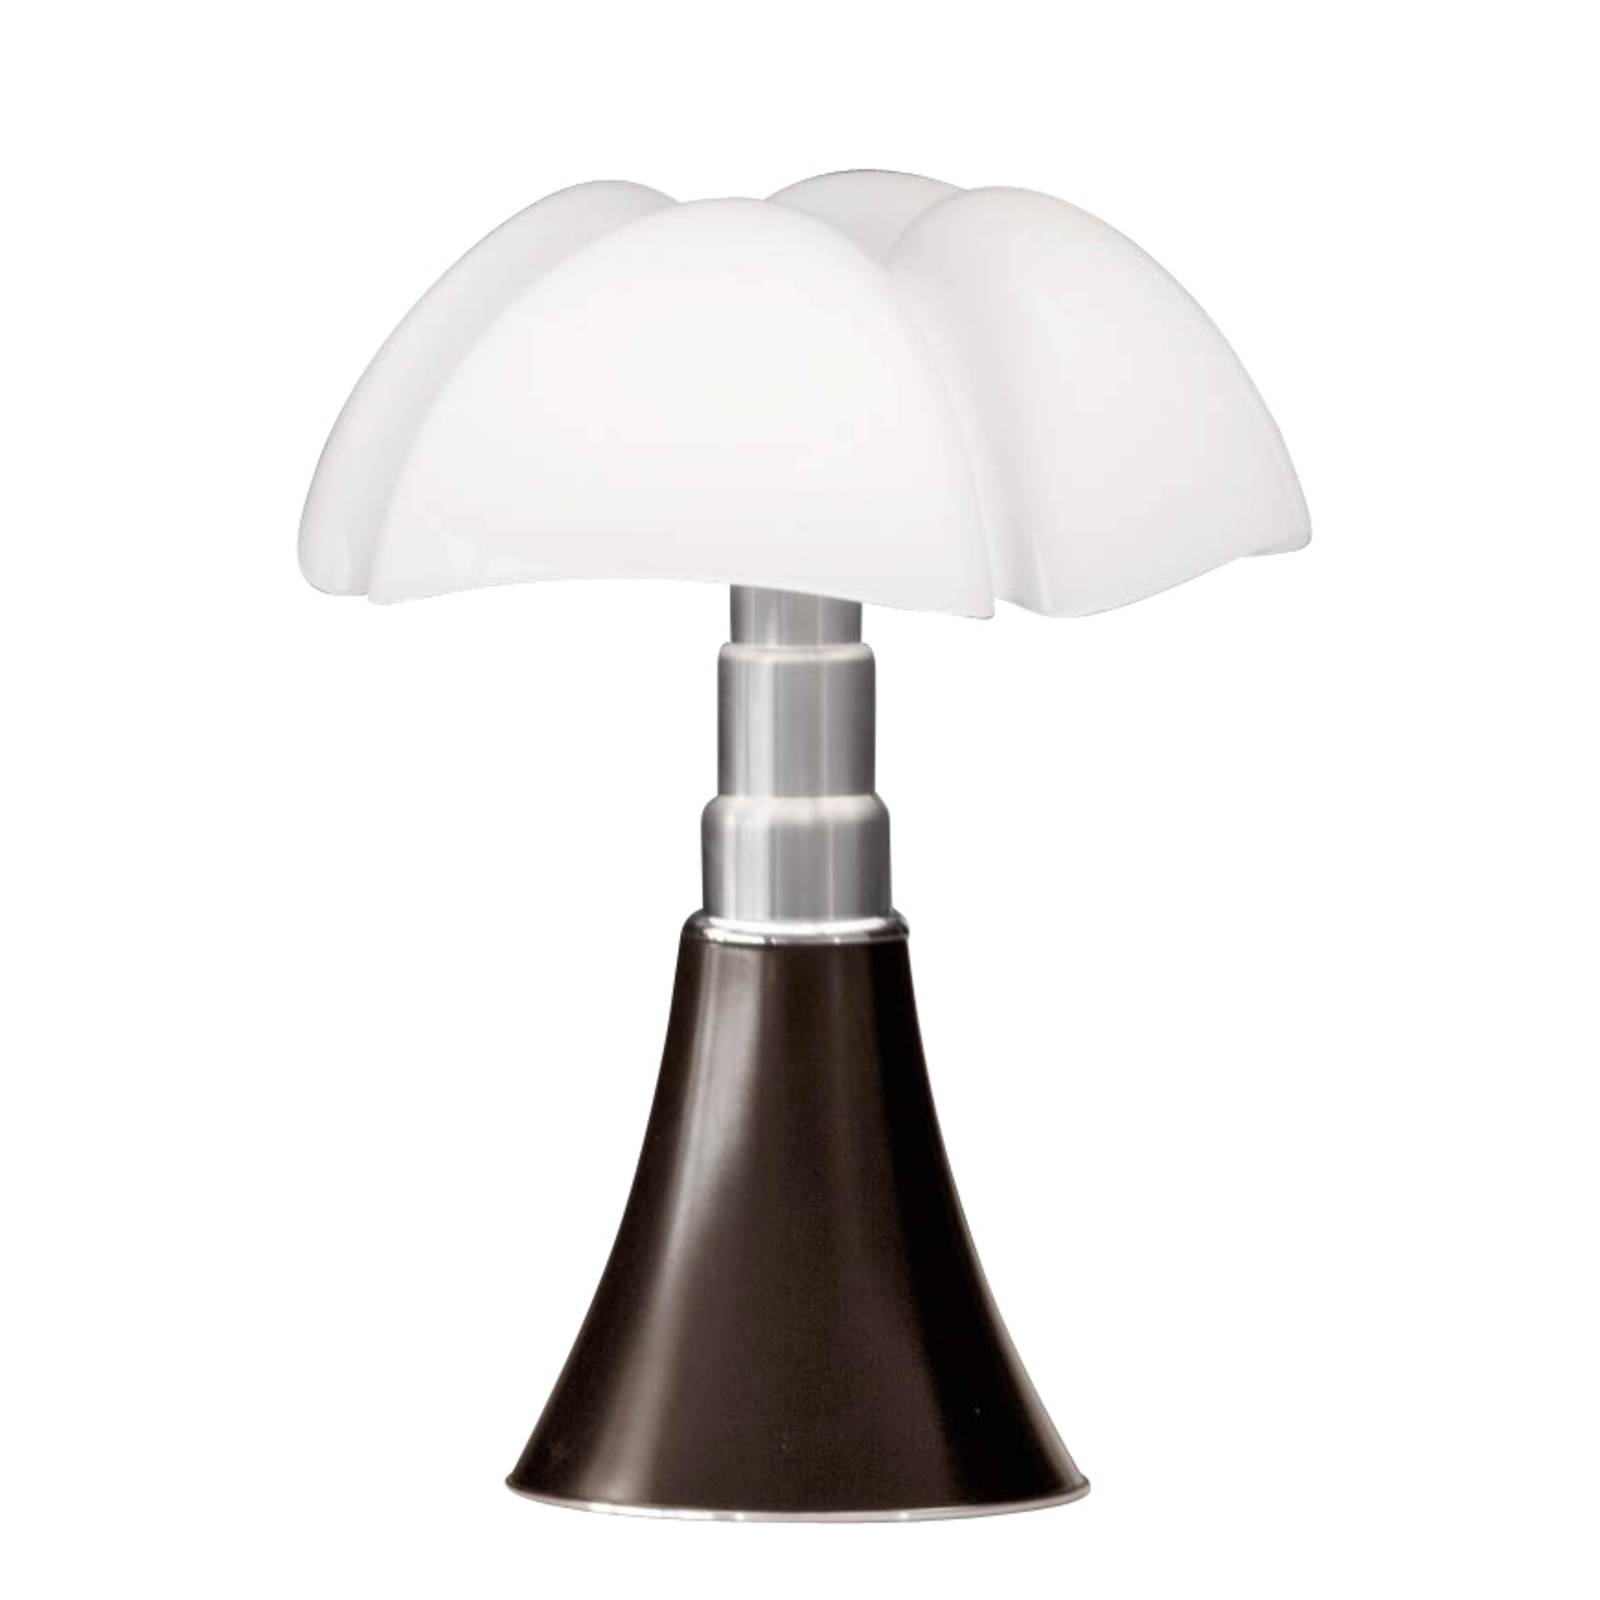 Martinelli Luce Pipistrello LED, dimmable, brown